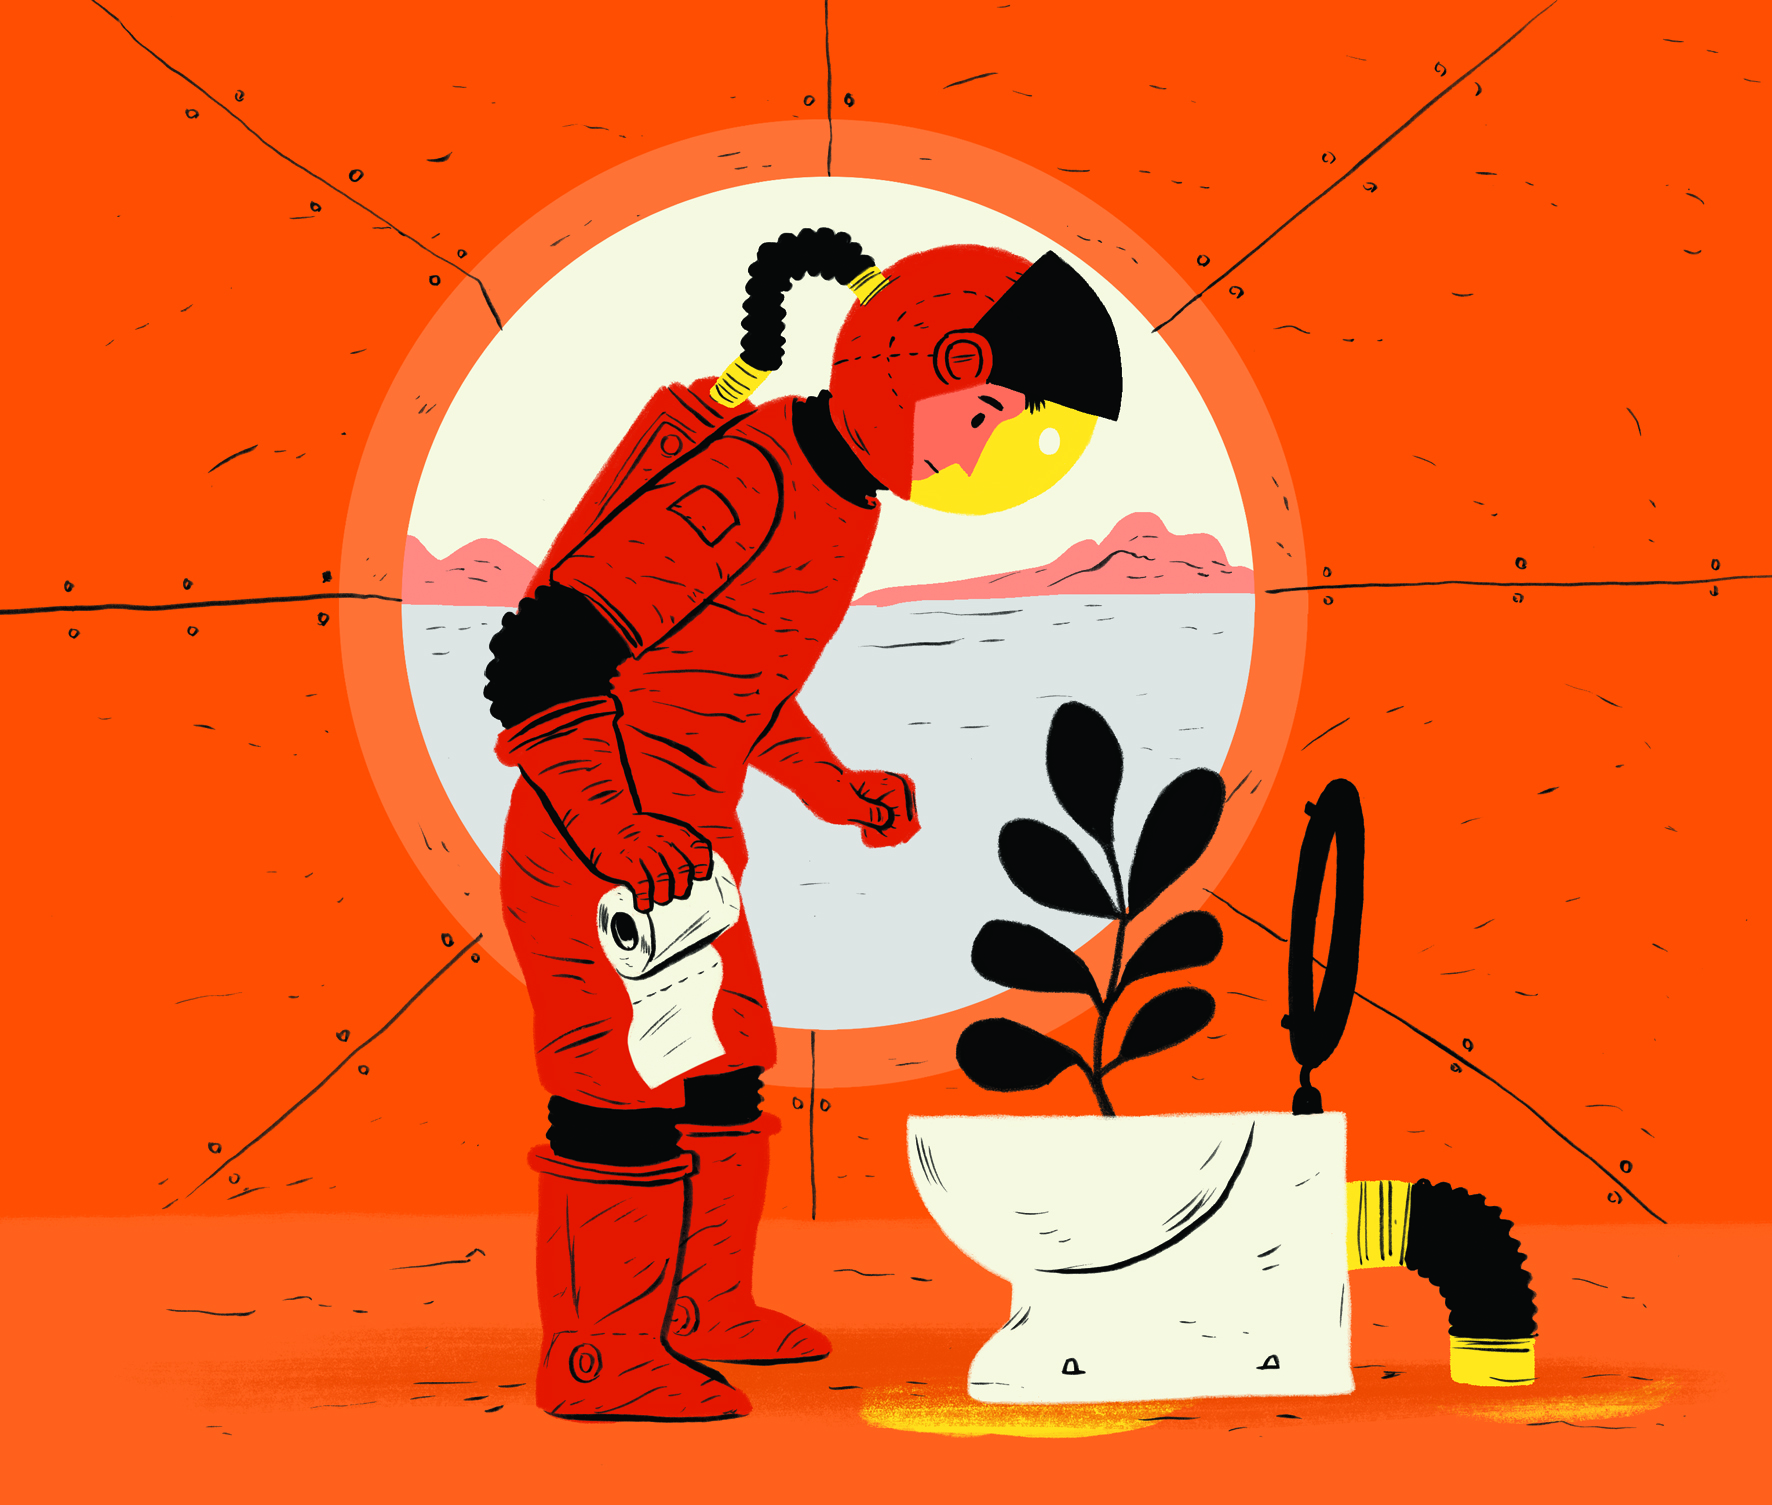 Could you fertilize Martian crops with human poop?